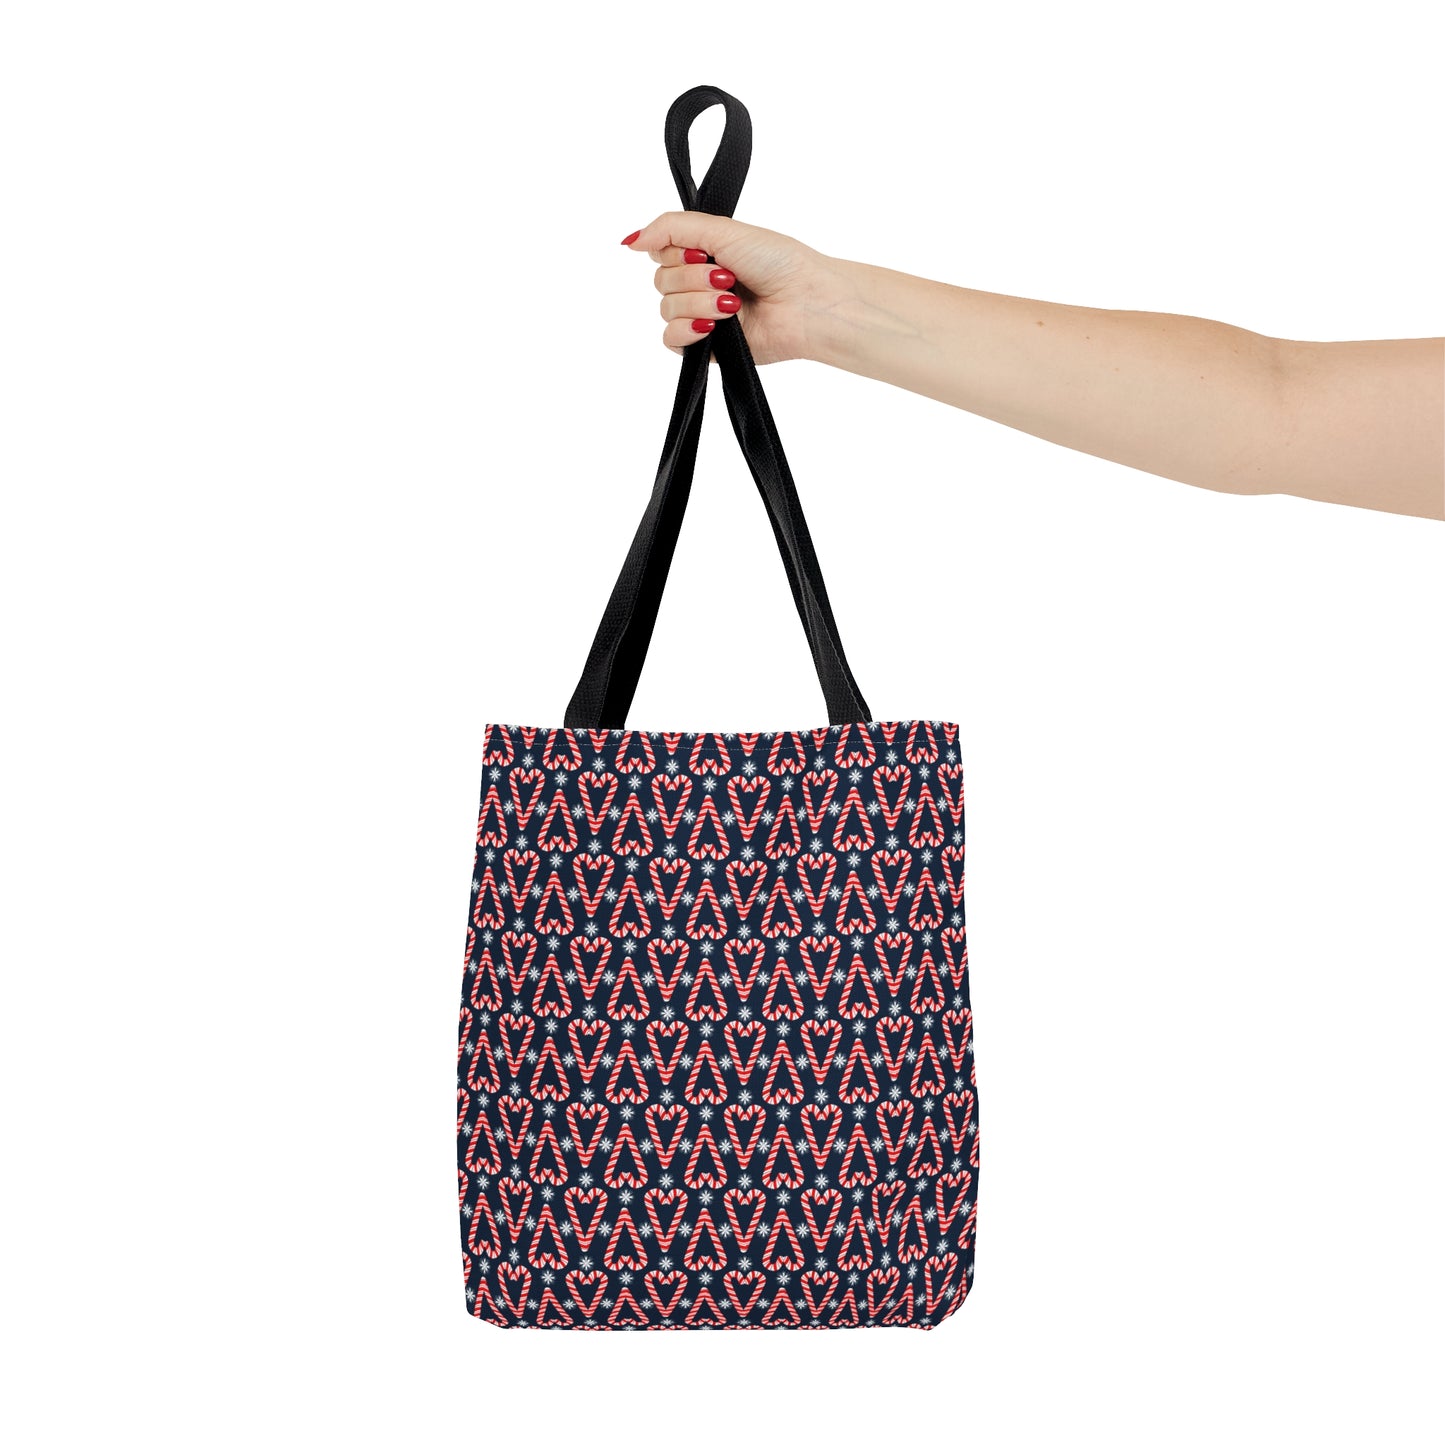 Candy Cane Hearts Tote Bag